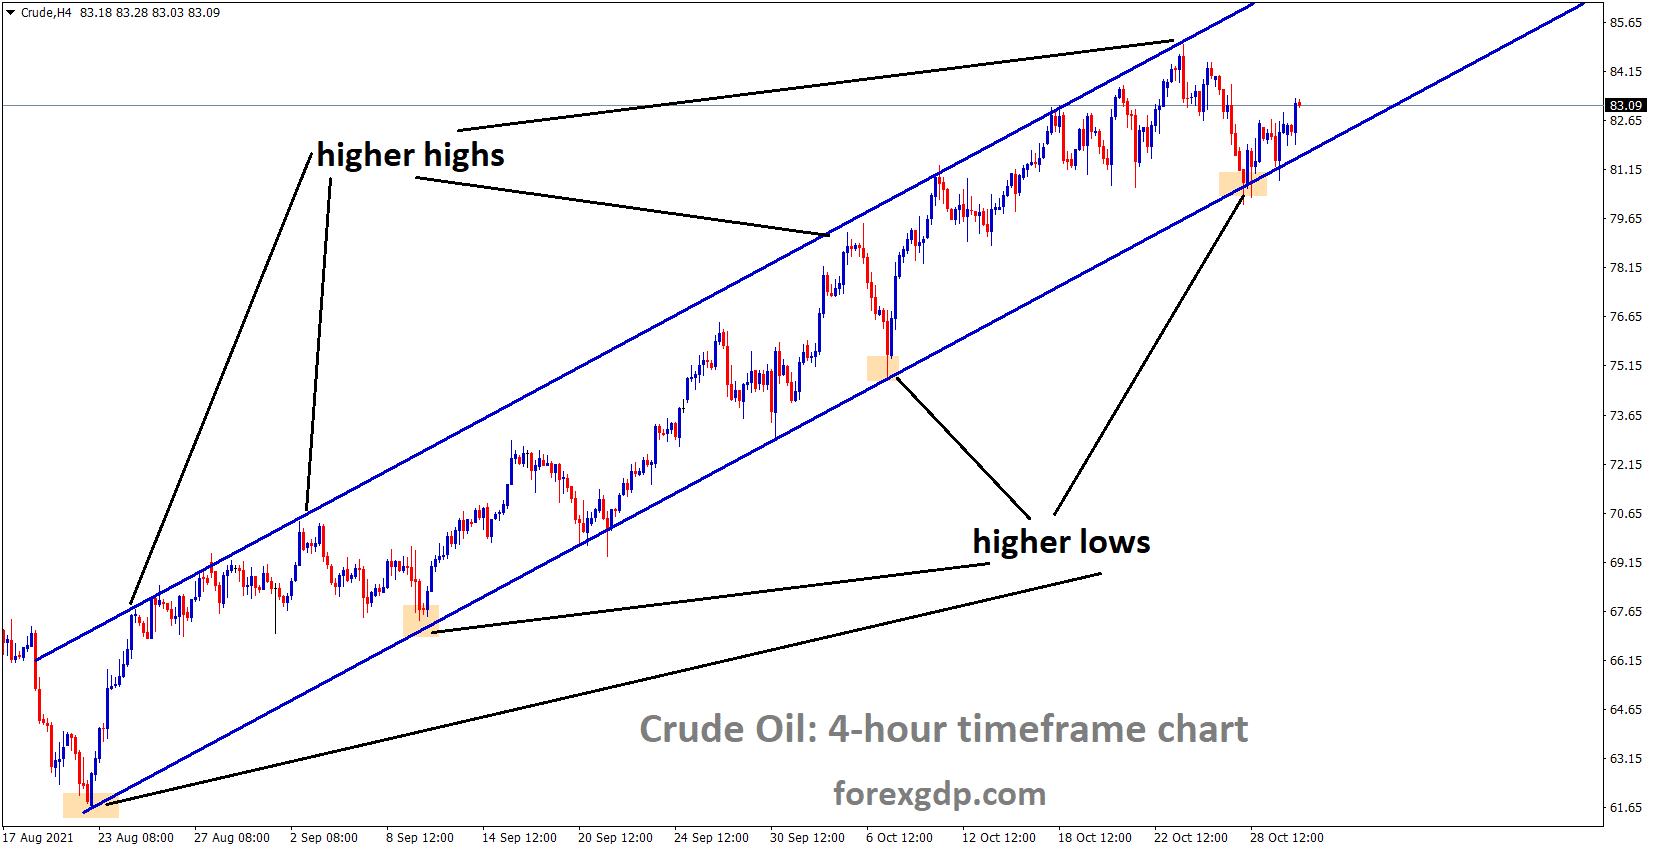 Crude oil prices are moving in an Ascending channel and rebounded from a Higher low area